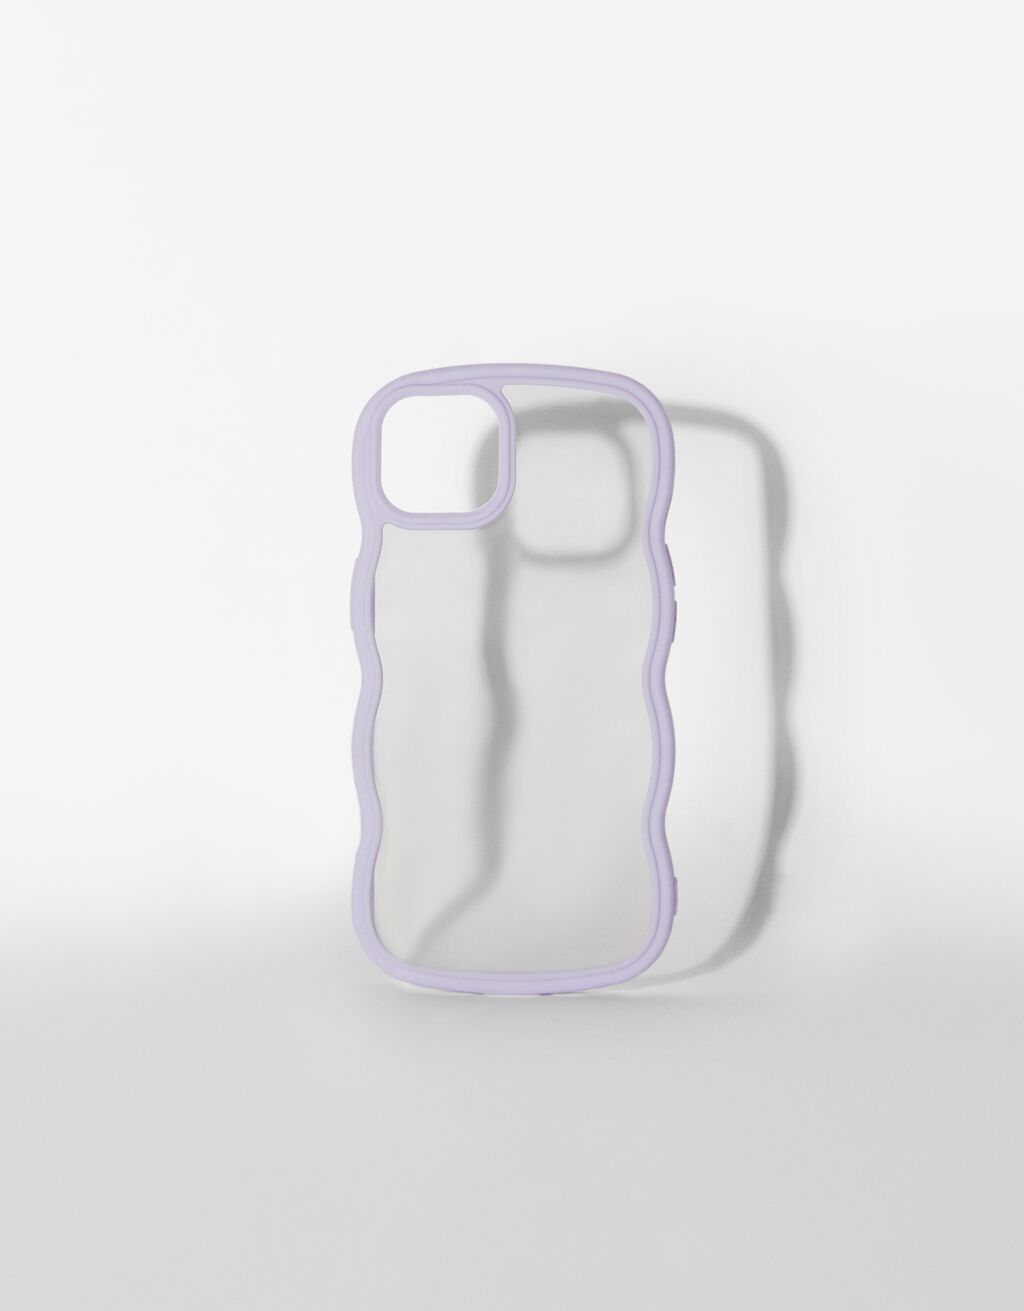 Transparent scalloped cell phone case